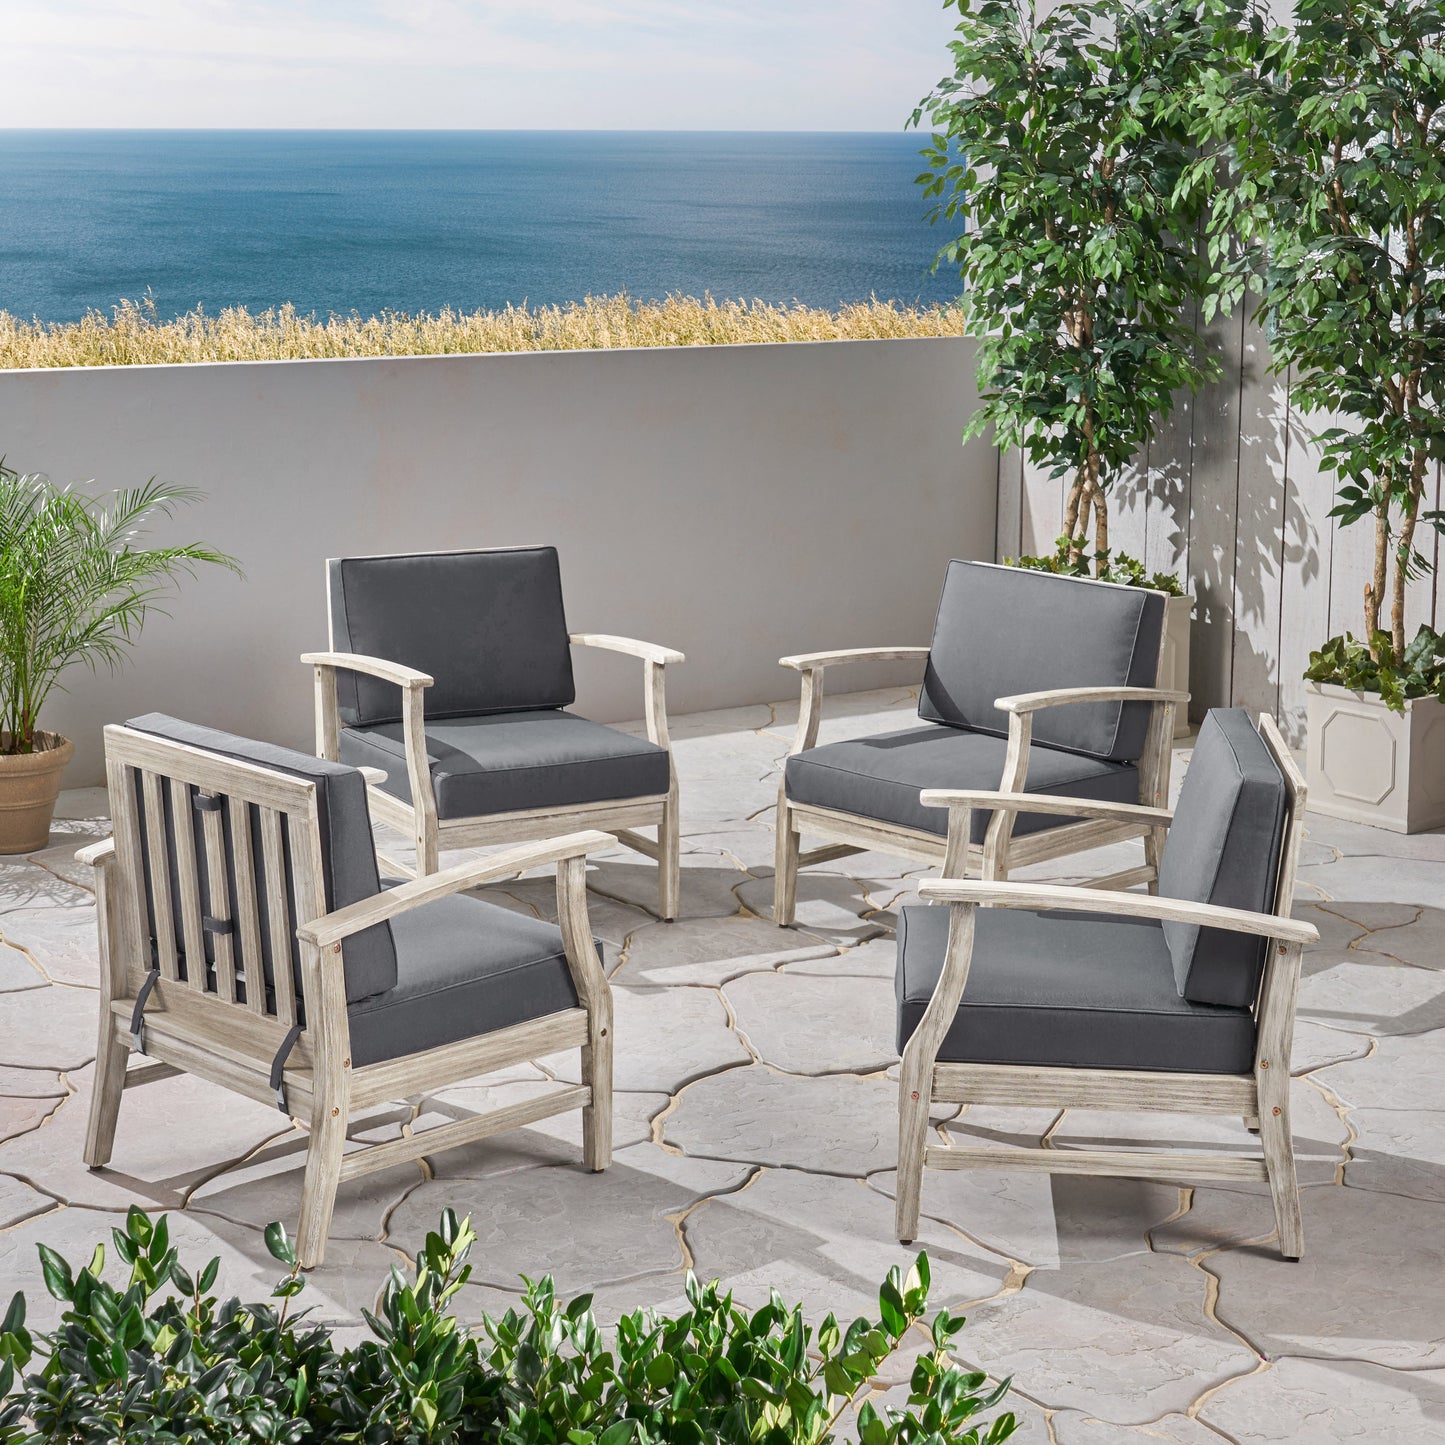 Fanny Outdoor Acacia Wood Club Chairs with Cushions (Set of 4), Light Gray and Dark Gray